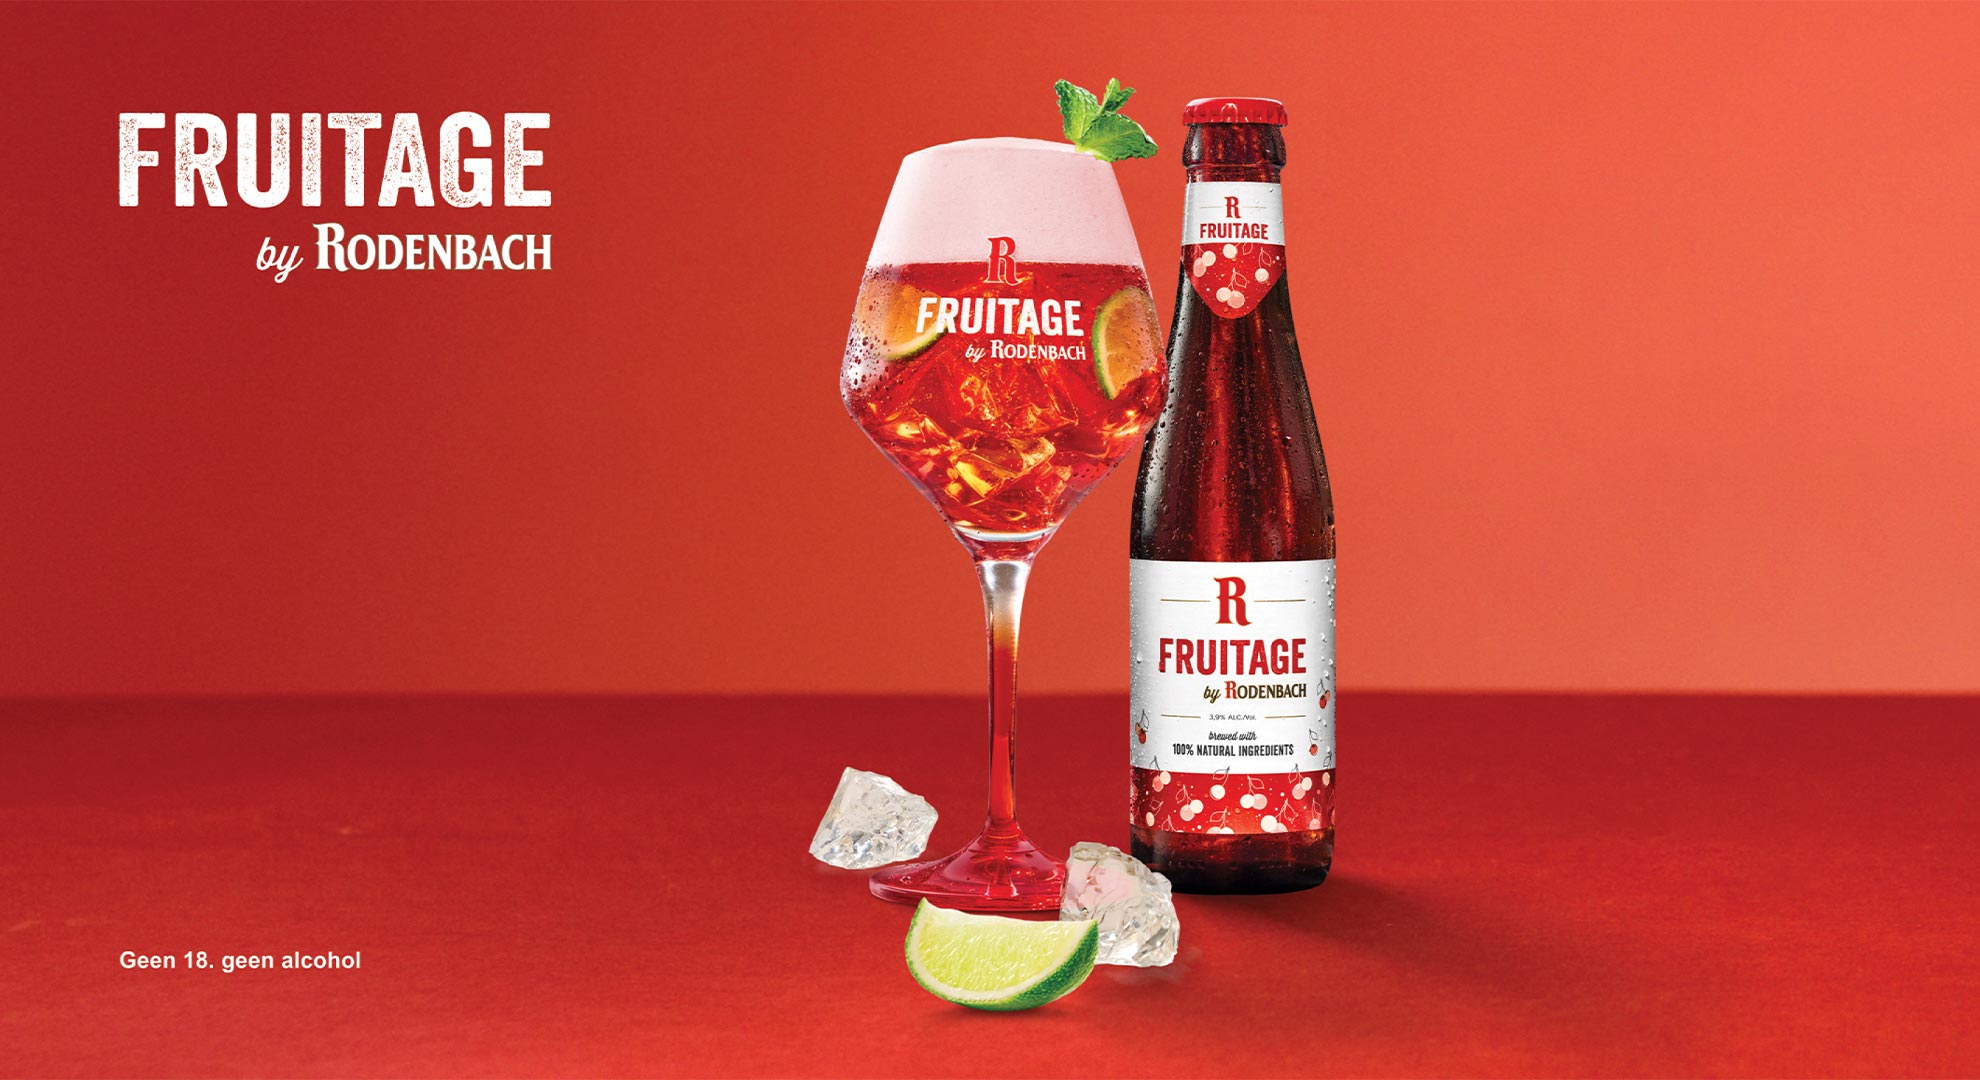 Fruitage by rodenbach